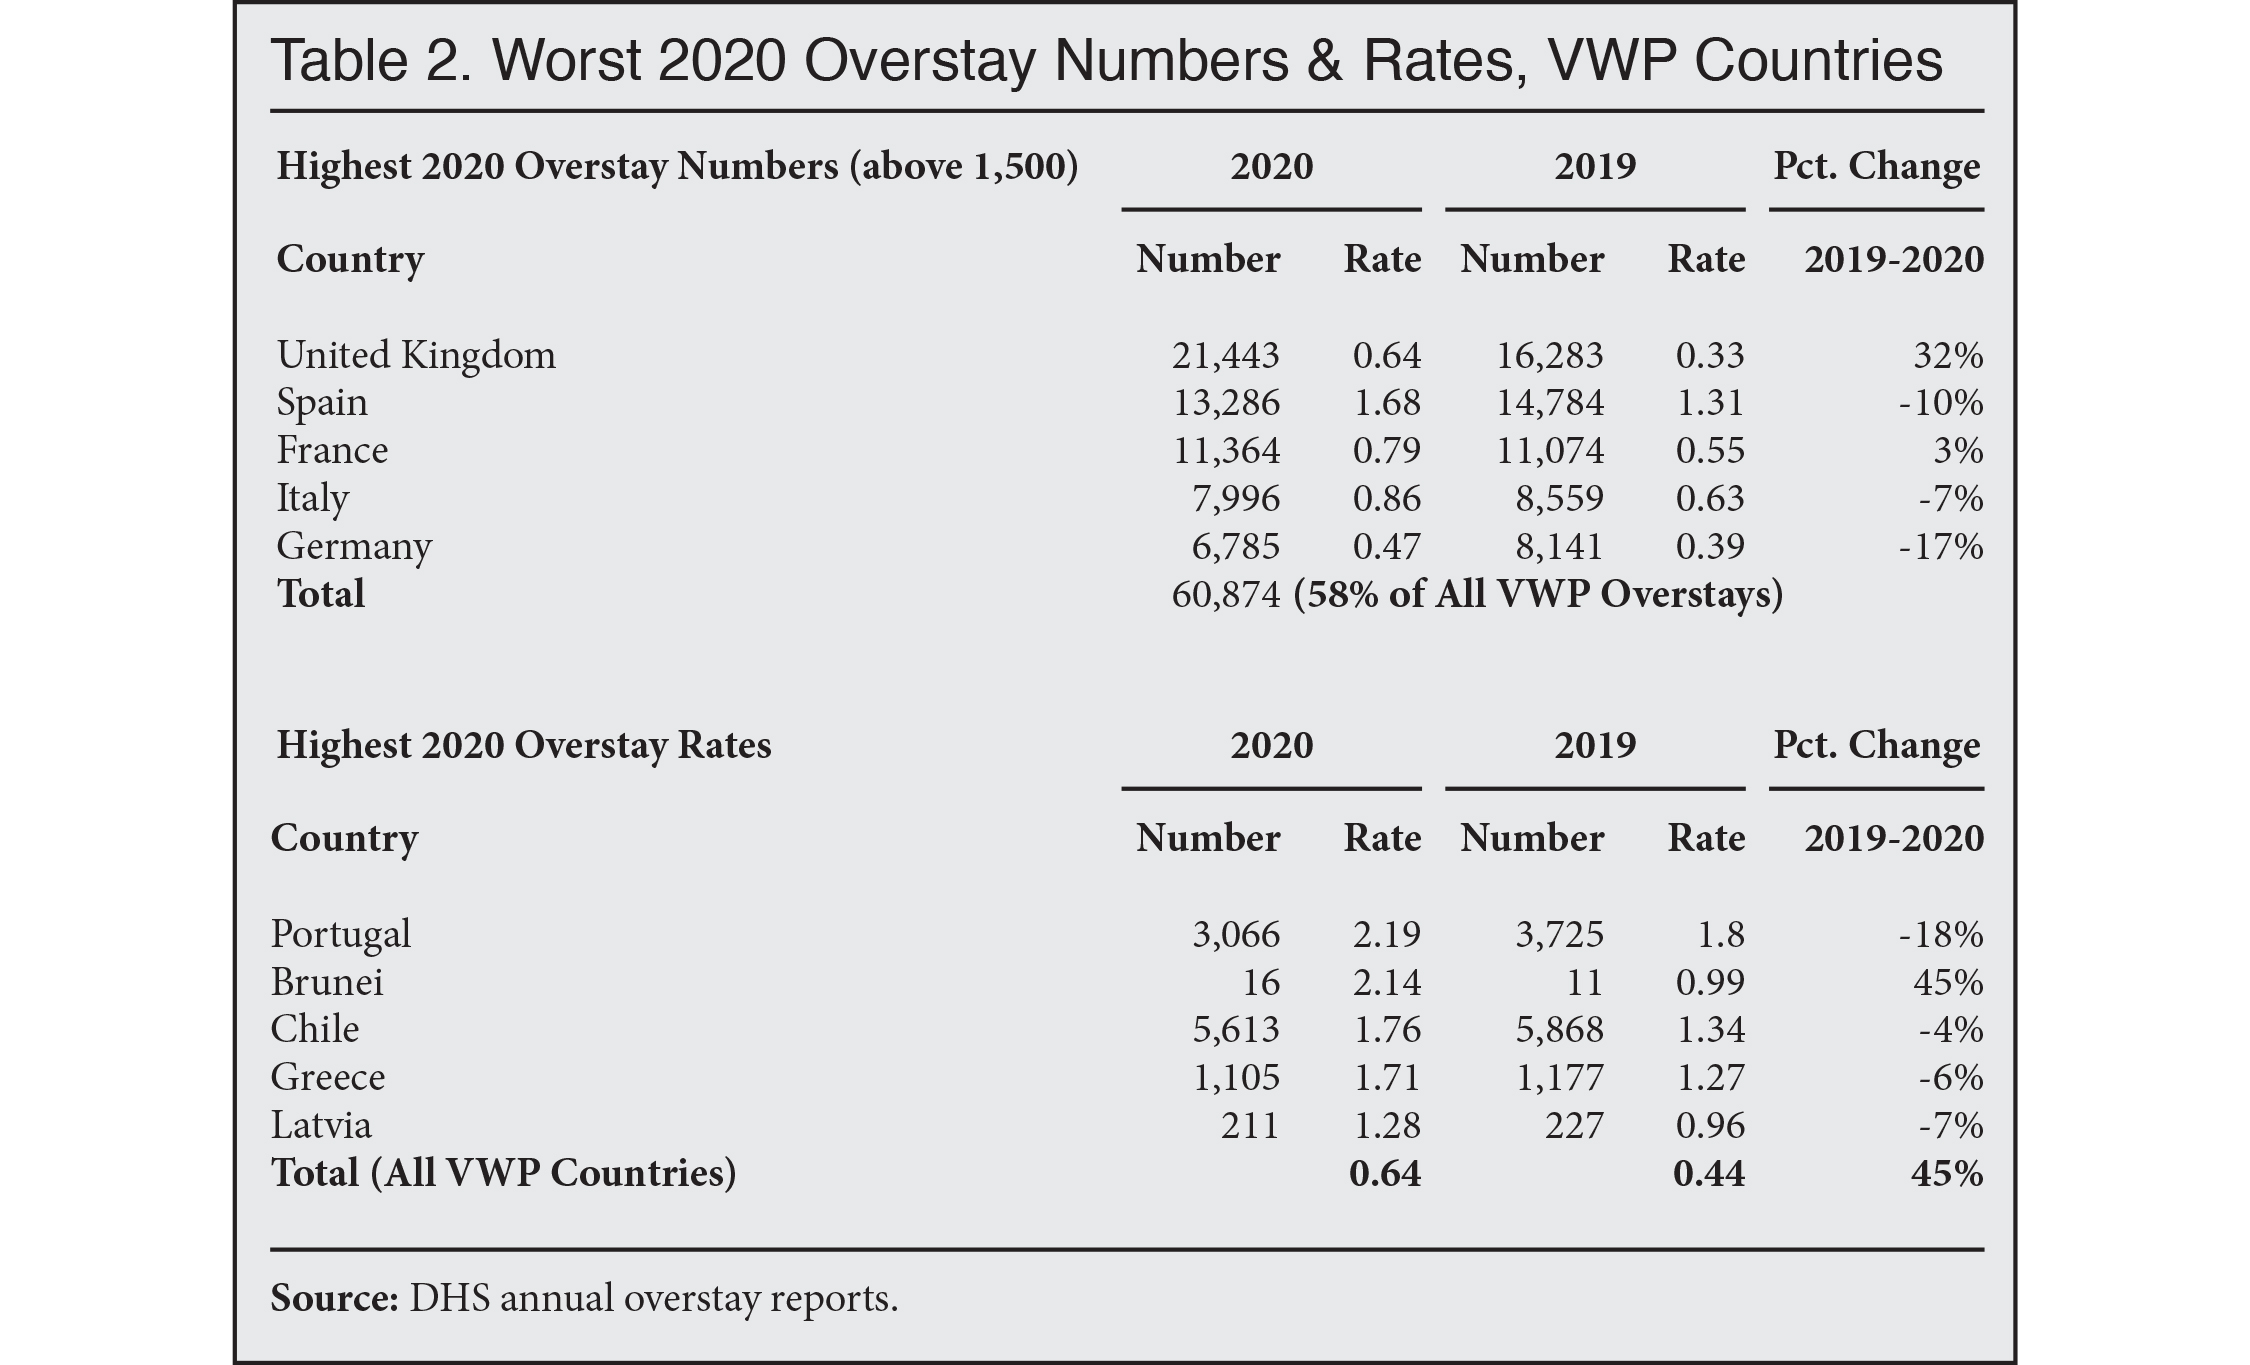 Table: Worst 2020 Overstay Numbers and Rates